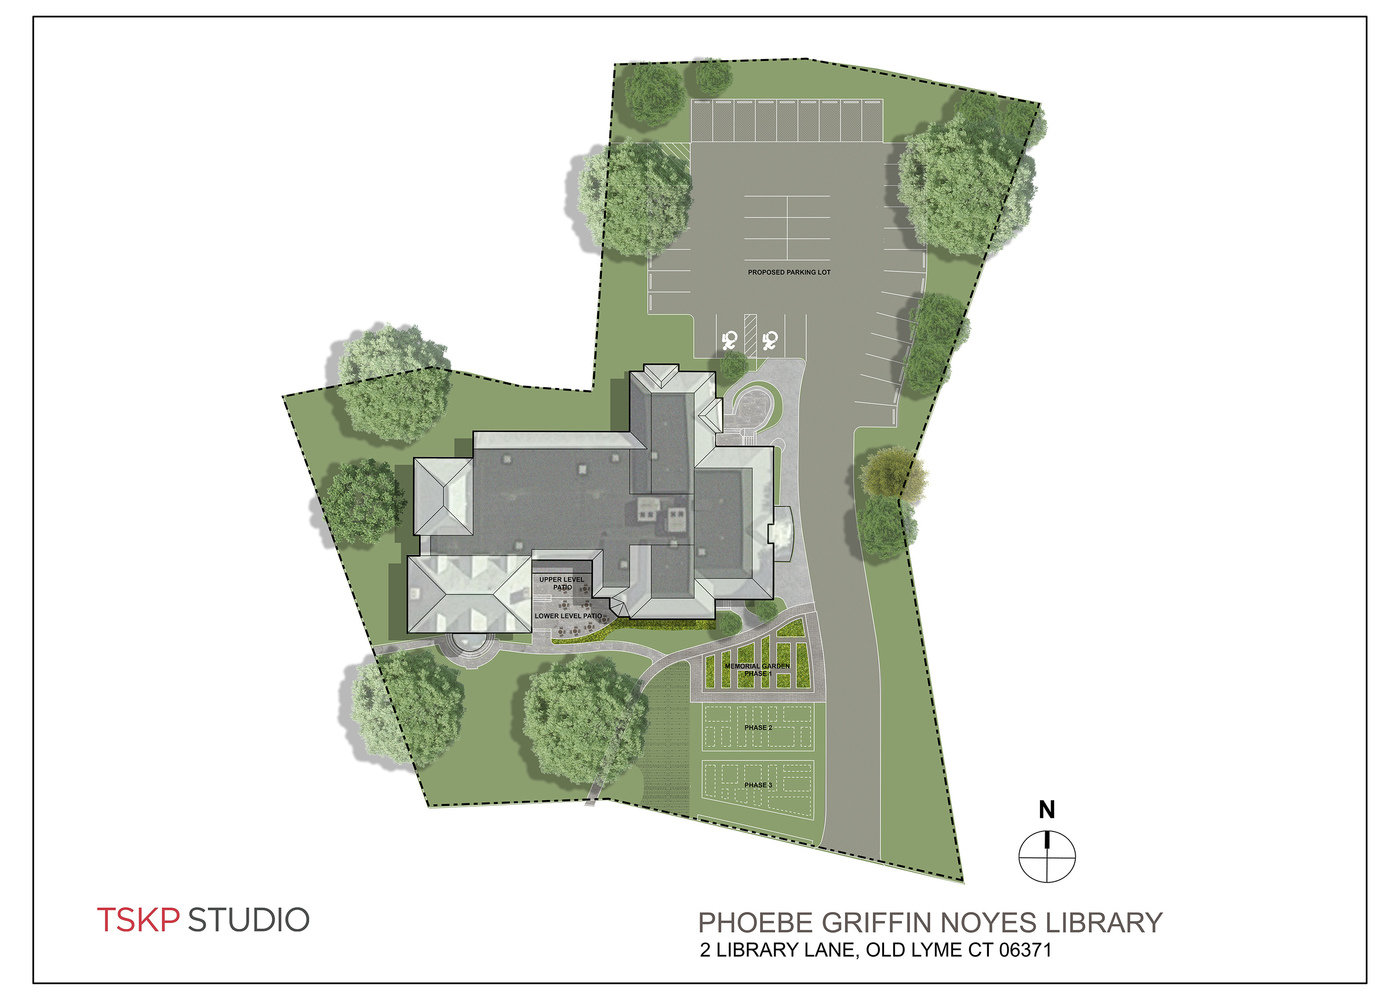 3 tskp old lyme phoebe griffin noyes library rendering site plan 1400 0x0x3150x2250 q85